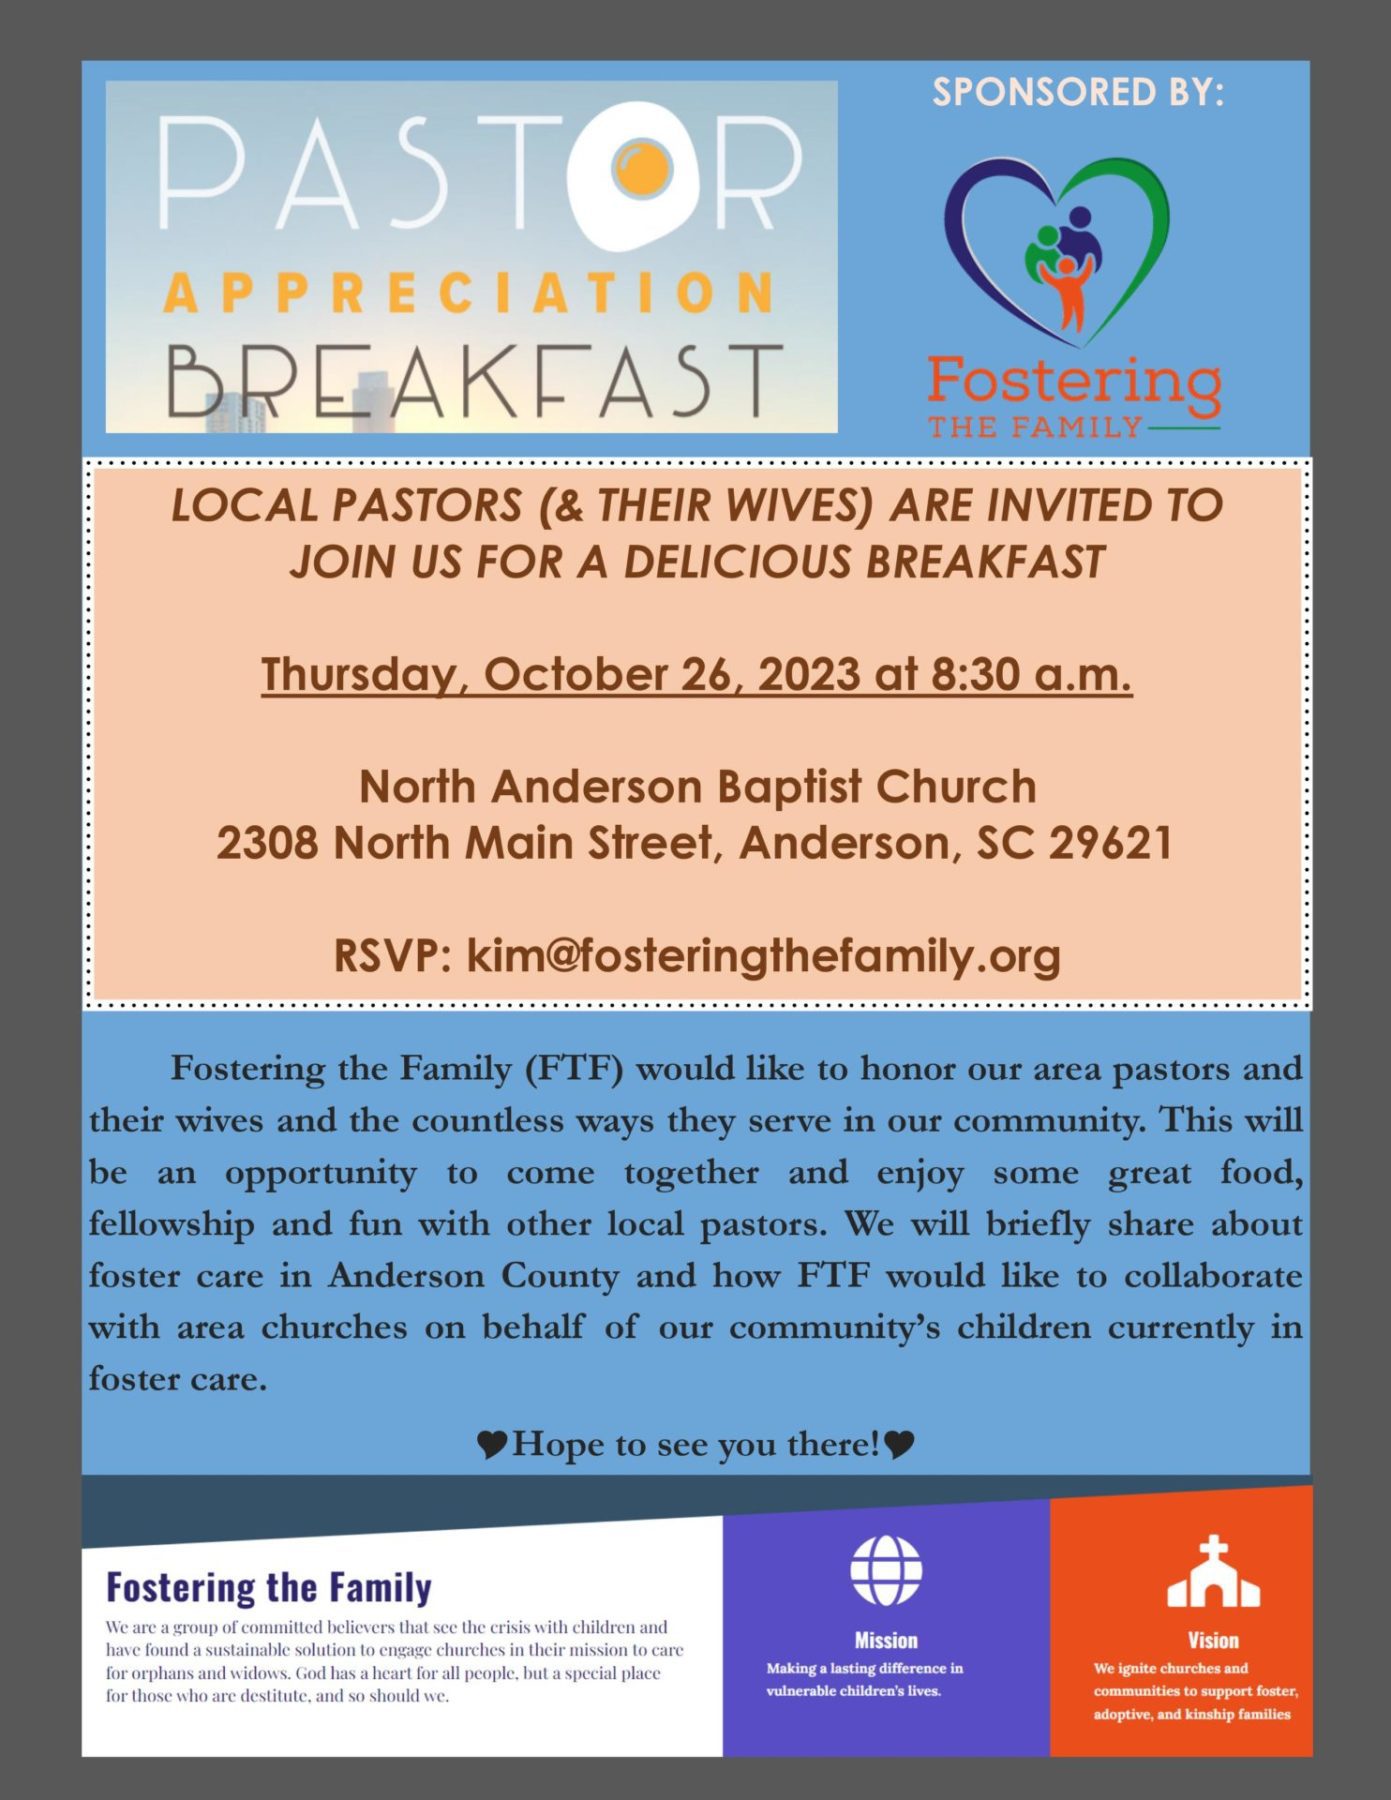 LOCAL PASTORS (& THEIR WIVES) ARE INVITED TO JOIN US FOR A DELICIOUS BREAKFAST. Thursday, October 26, 2023 at 8:30 a.m. North Anderson Baptist Church. 2308 North Main Street, Anderson, SC 29621. RSVP: kim@fosteringthefamily.org